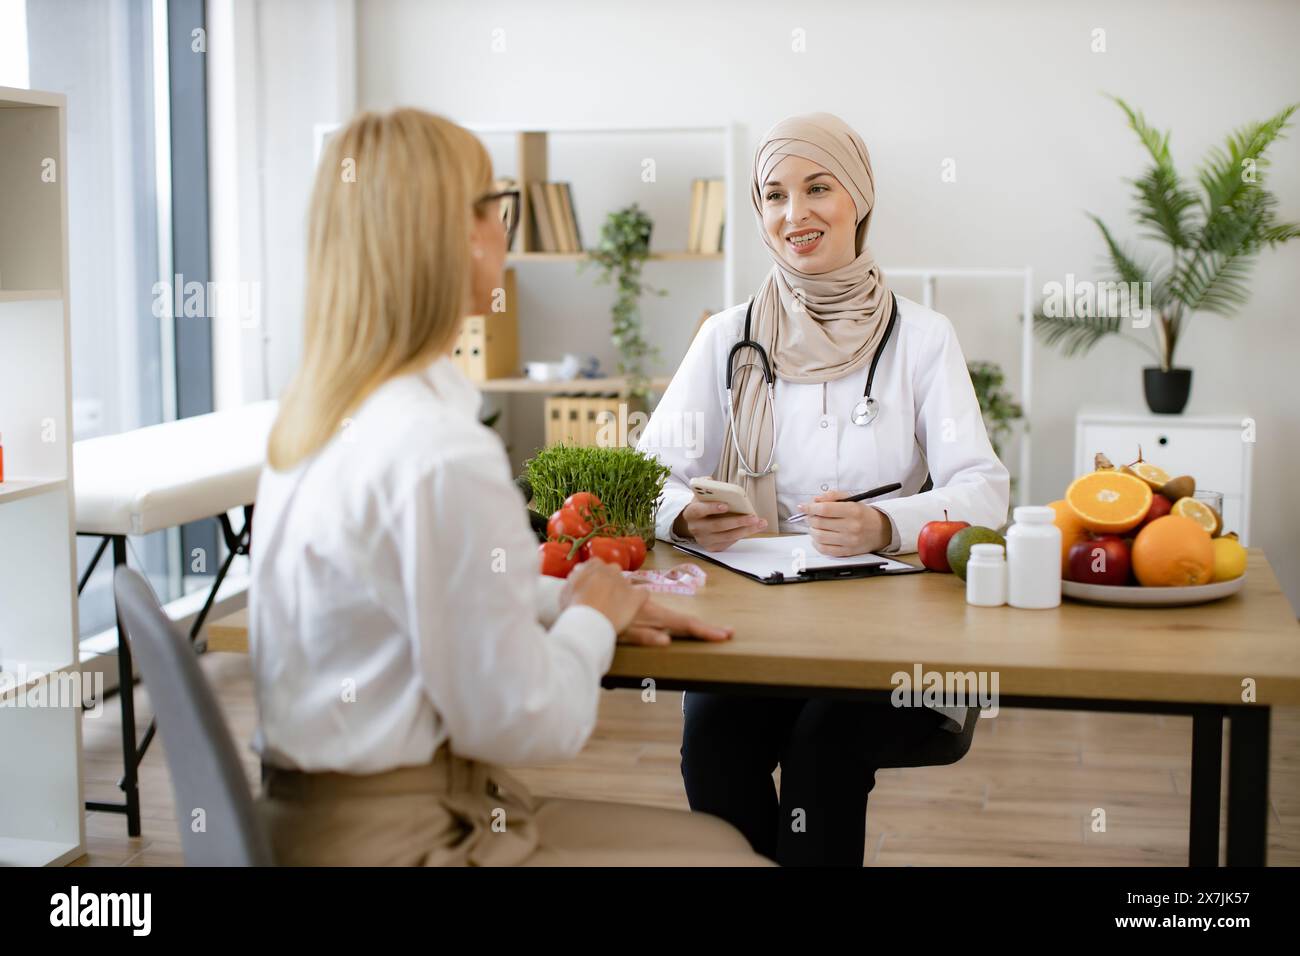 Muslim female doctor sitting at table writing diet plan talking with mature patient lady. Experienced female dietitian preparer course of healthy nutr Stock Photo